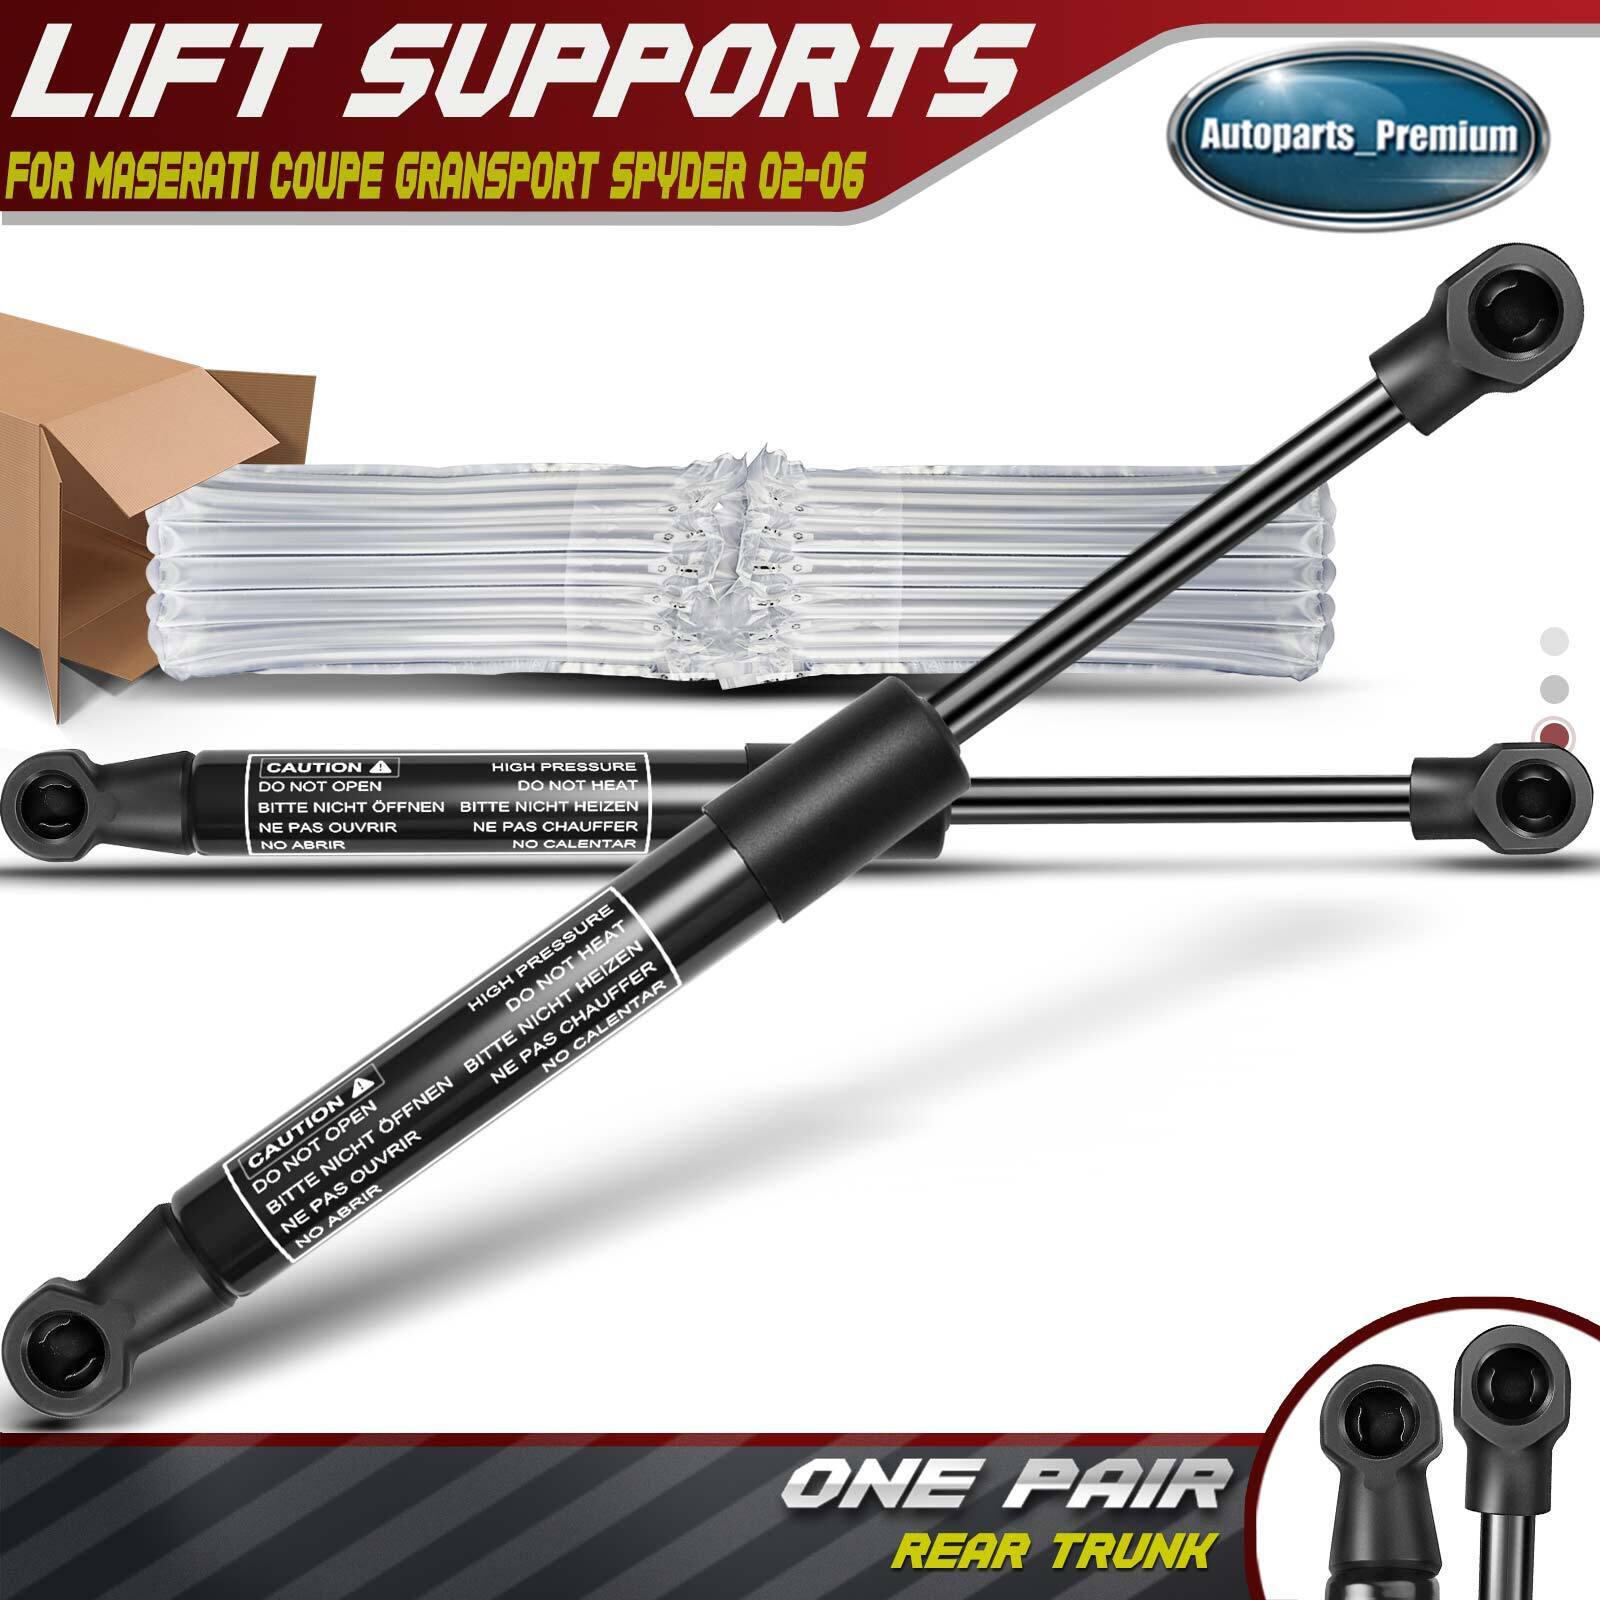 2pcs Rear Trunk Lift Supports Shocks for Maserati Coupe GranSport Spyder 02-06